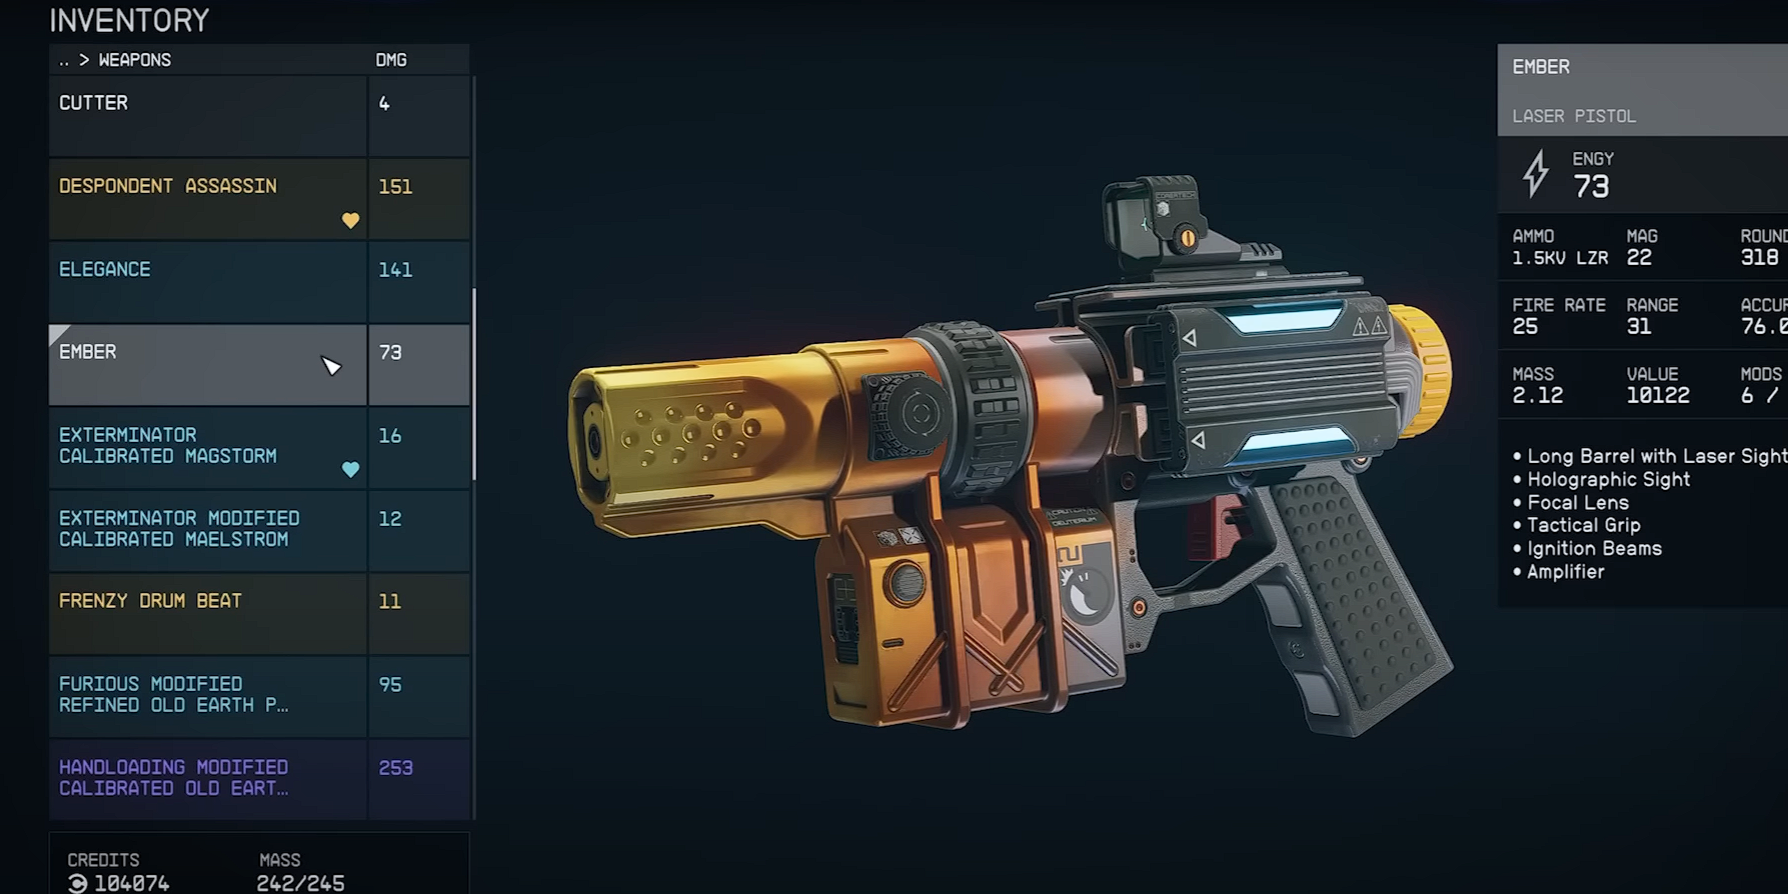 Ember Laser Pistol in the Player Inventory Menu in Starfield